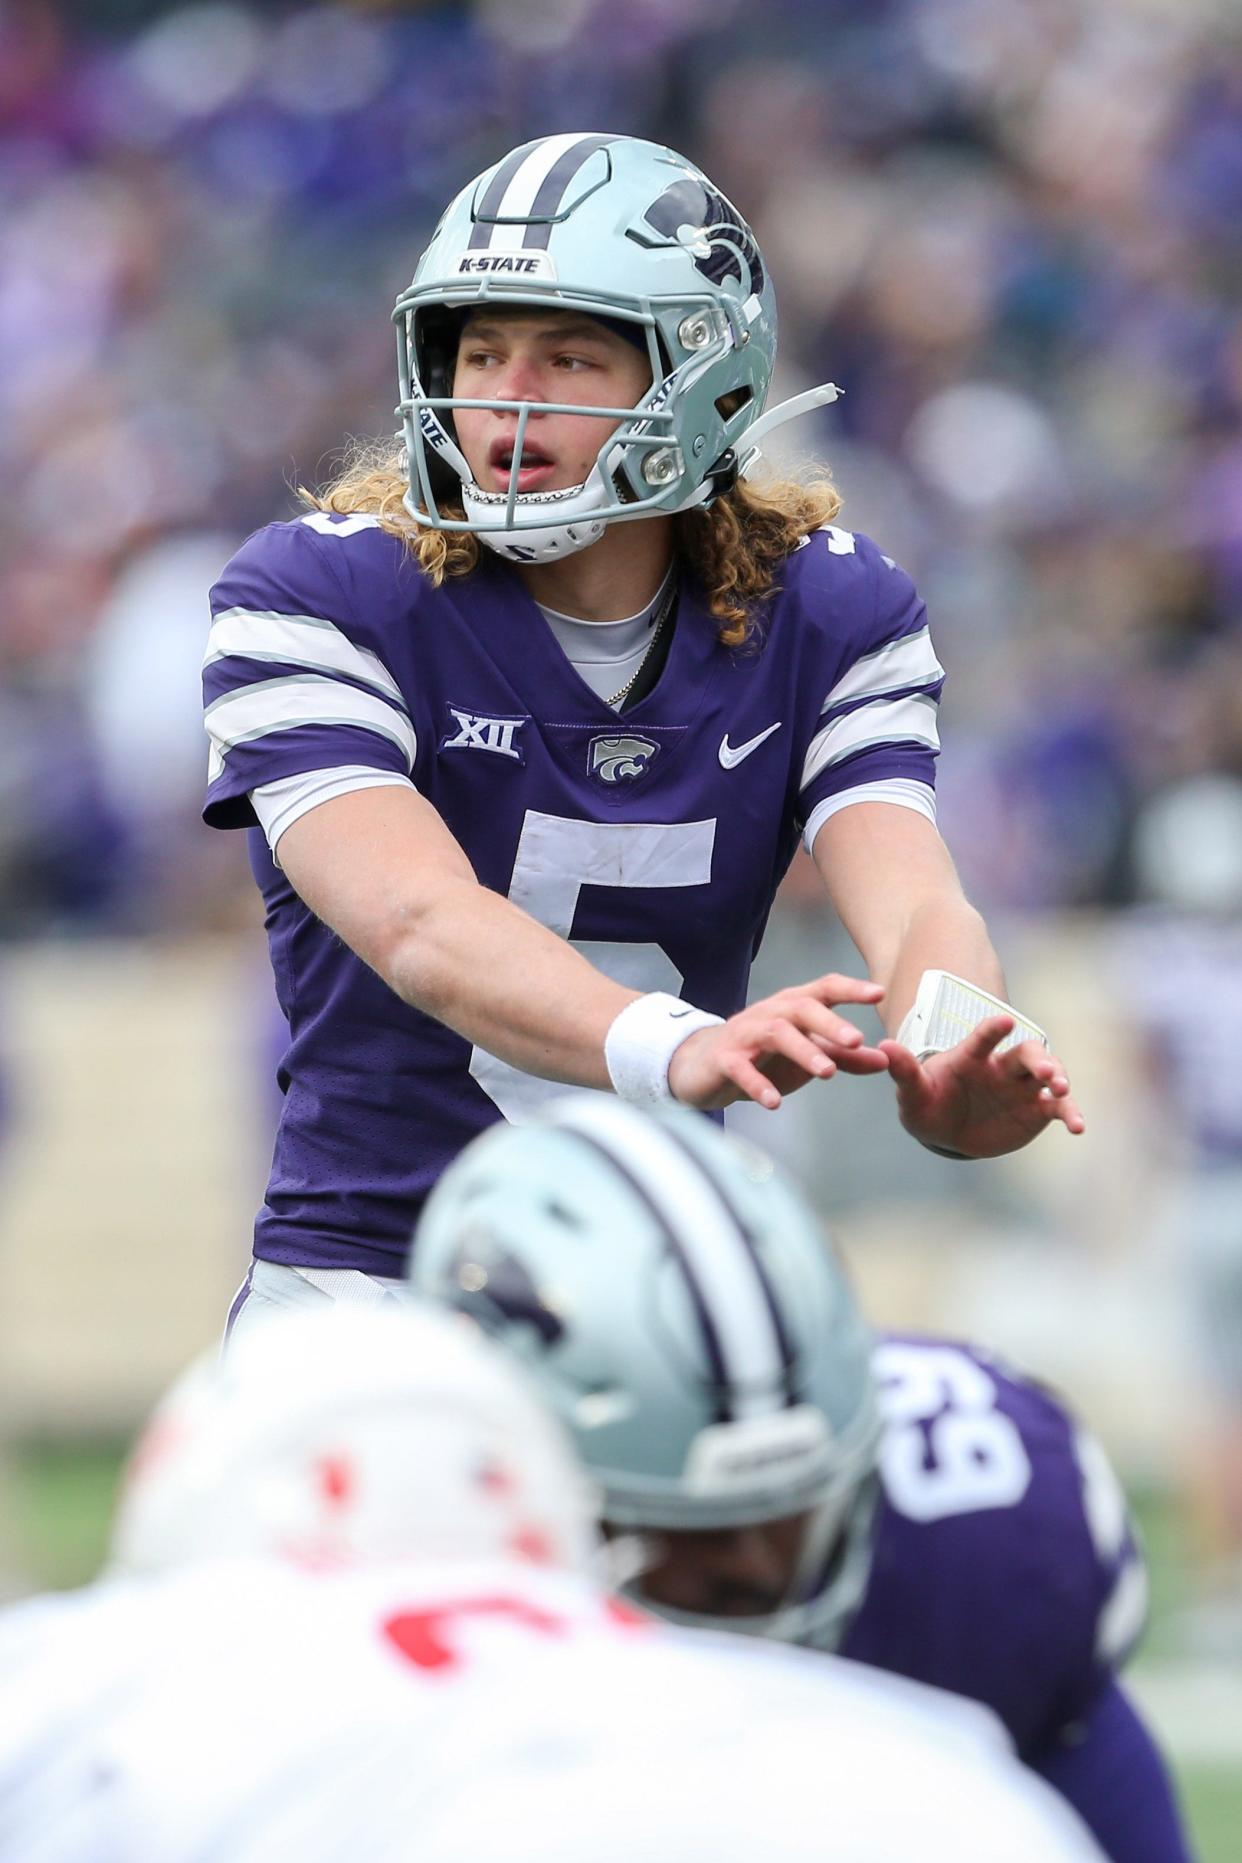 Kansas State true freshman Avery Johnson (5) is expected to start at quarterback for Kansas State in the Wildcats' bowl game after senior Will Howard entered the transfer portal.